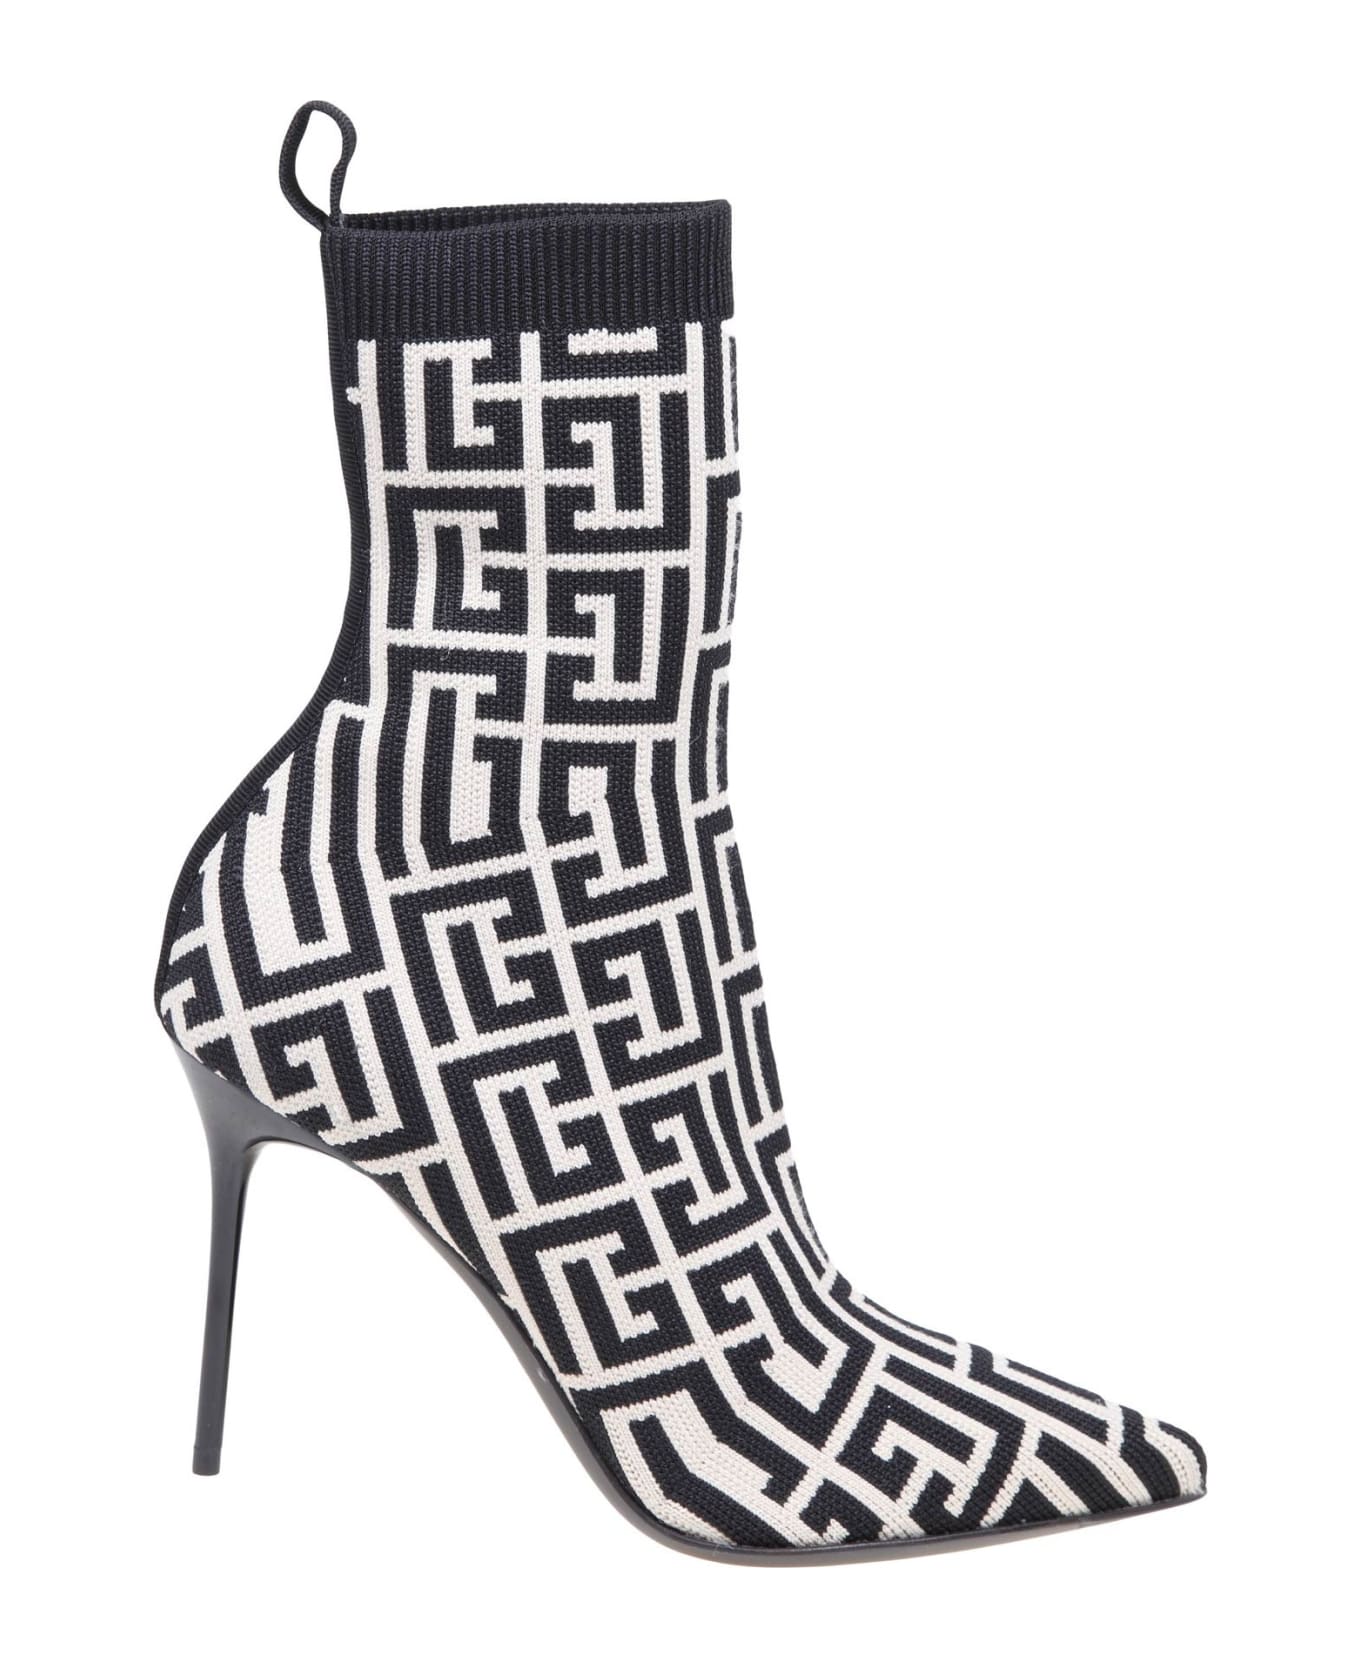 Balmain Black And Ivory Knitted Monogram Ankle Boots - IVOIRE/NOIR